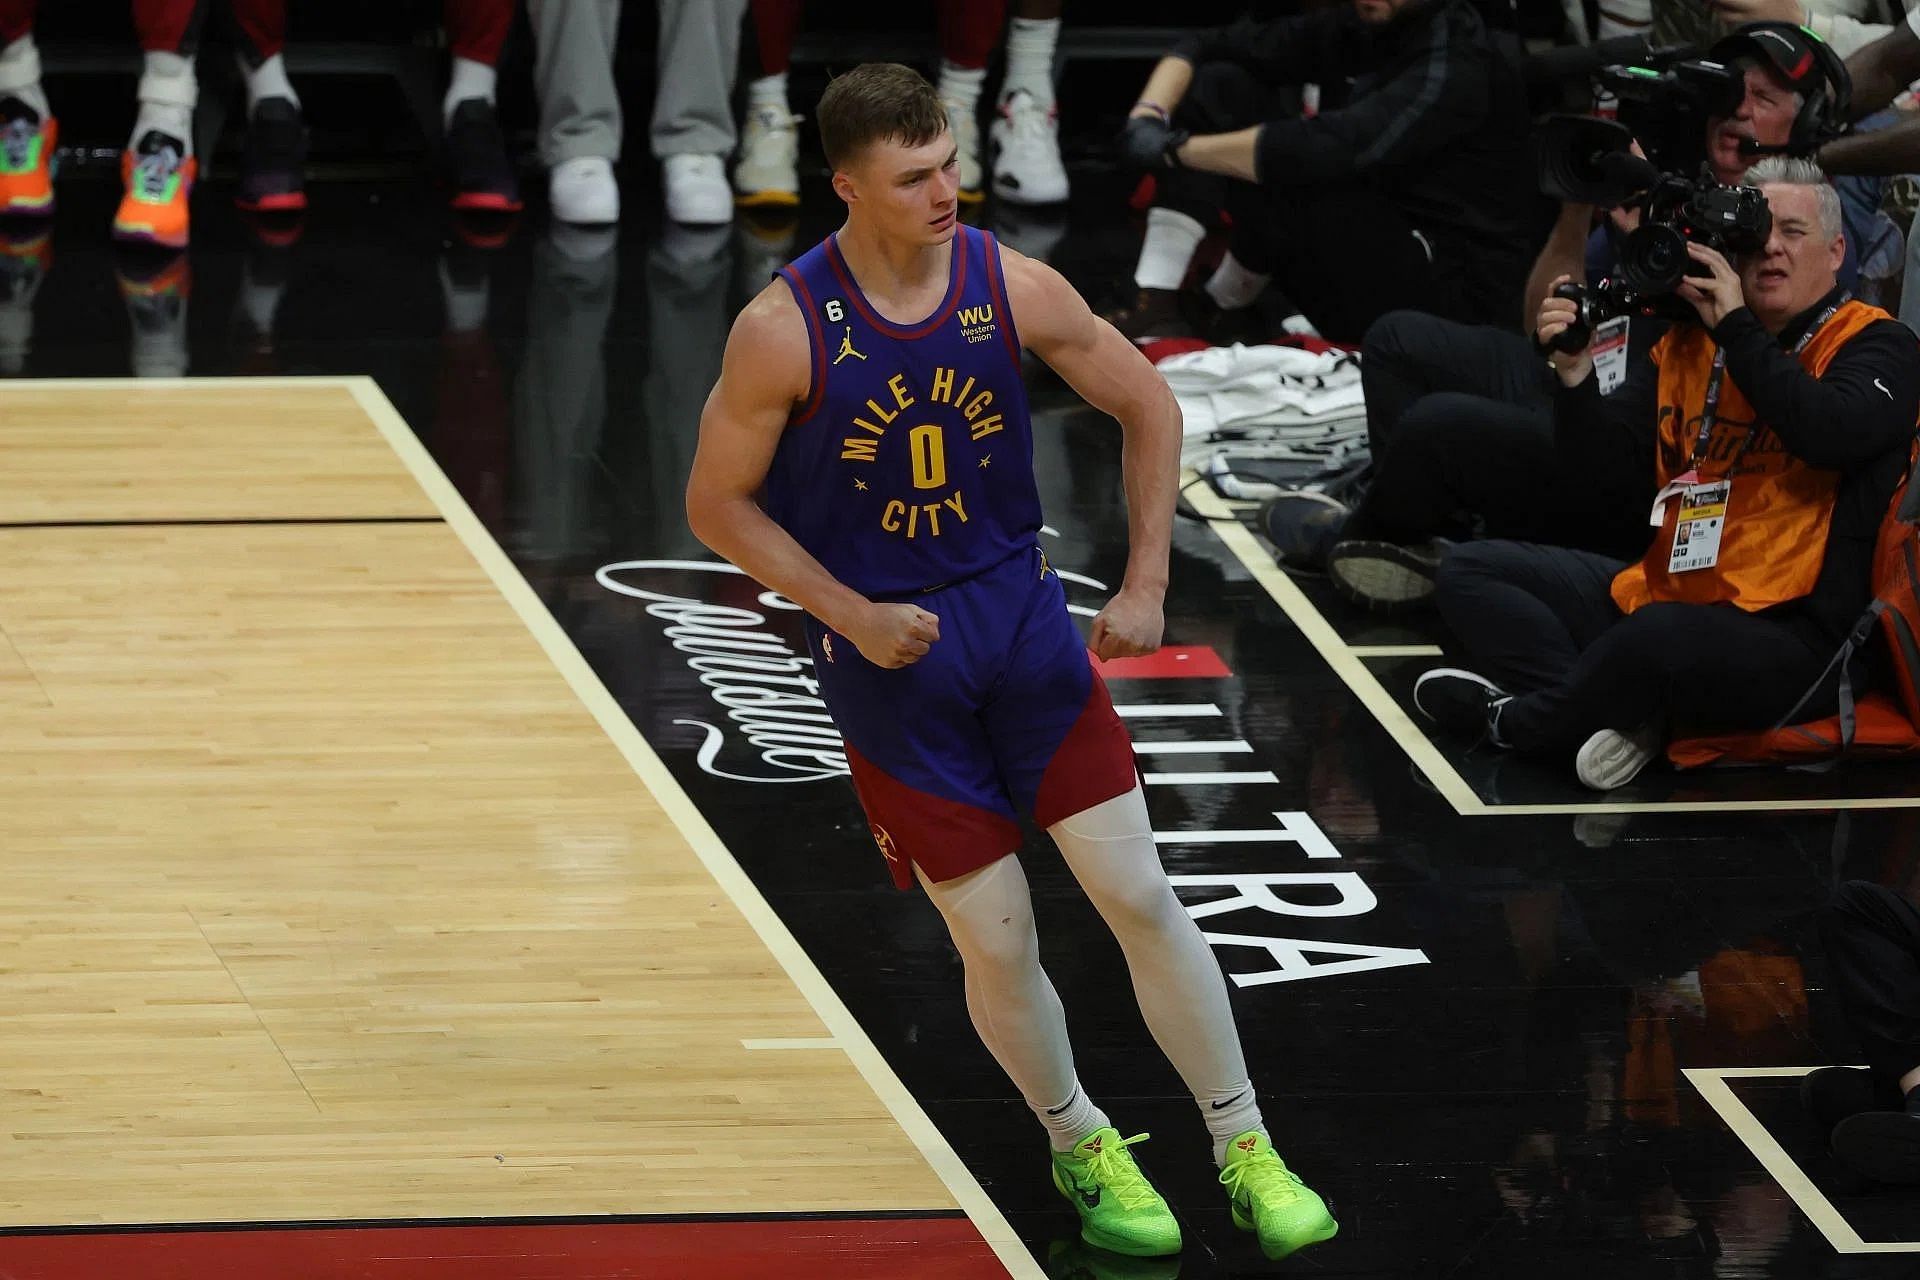 Second-year player Christian Braun provided one of the highlight plays in the opening half of the Denver Nuggets-Los Angeles Lakers season-opener.